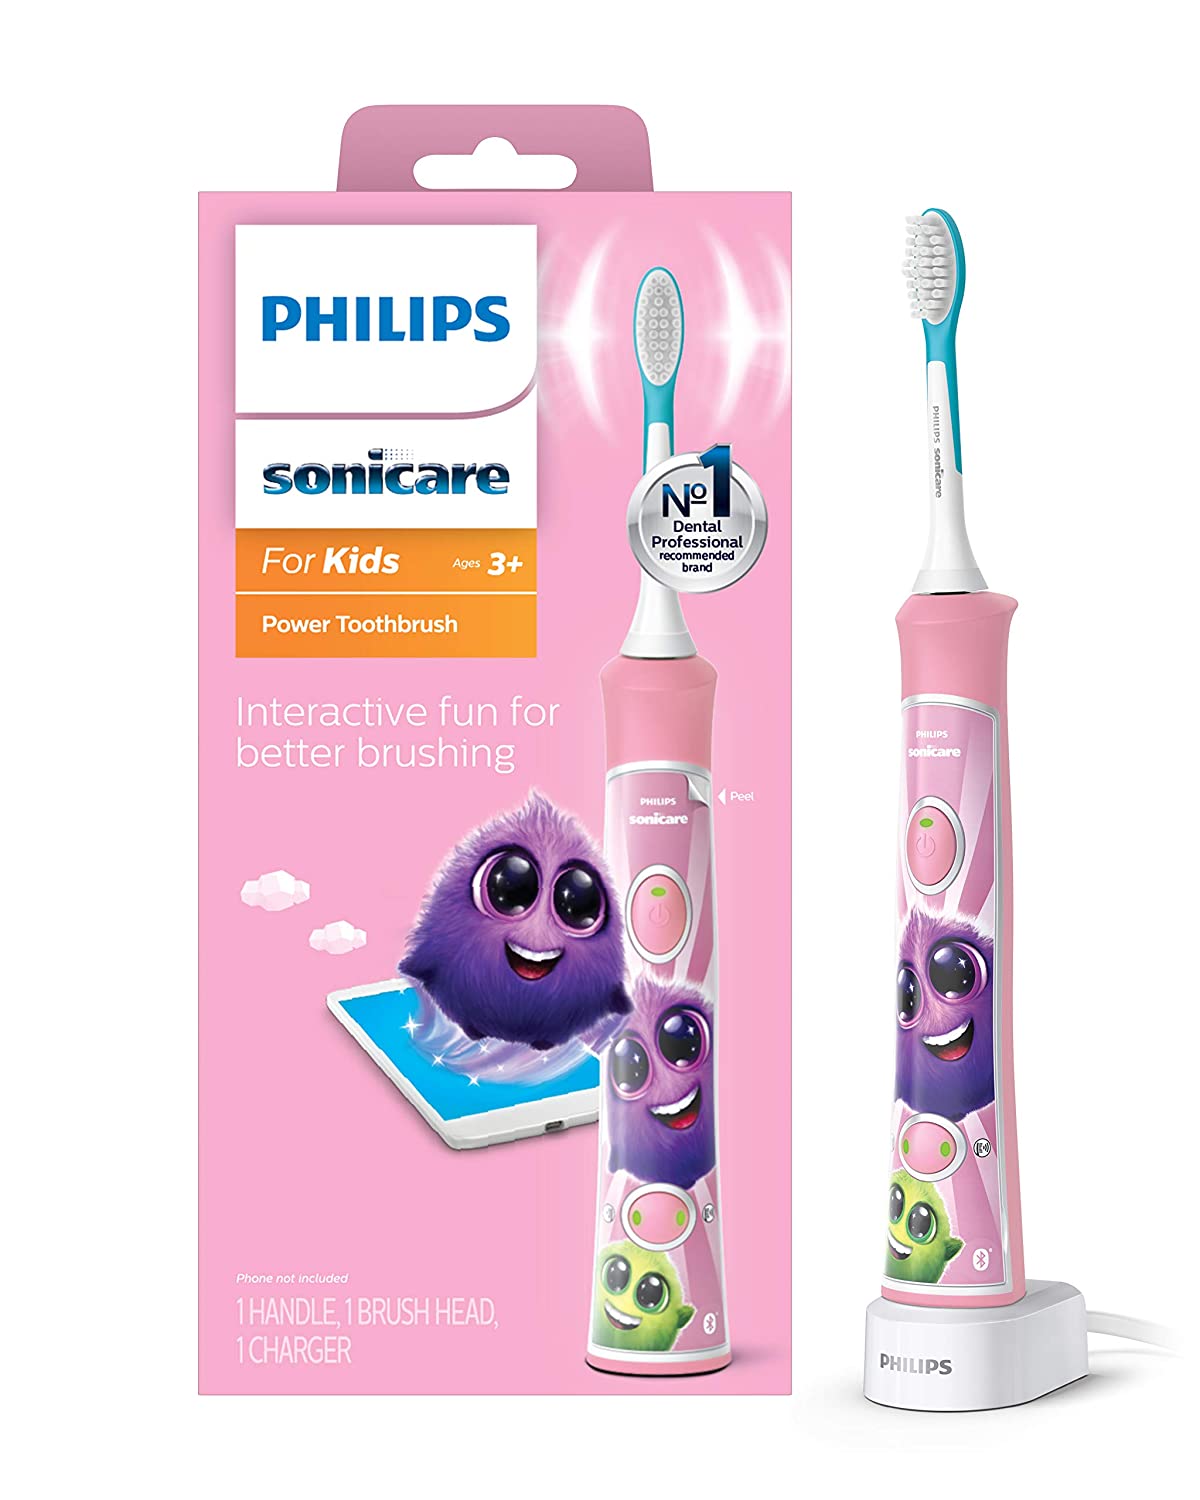 4. Philips Sonicare Rechargeable Electric Toothbrush